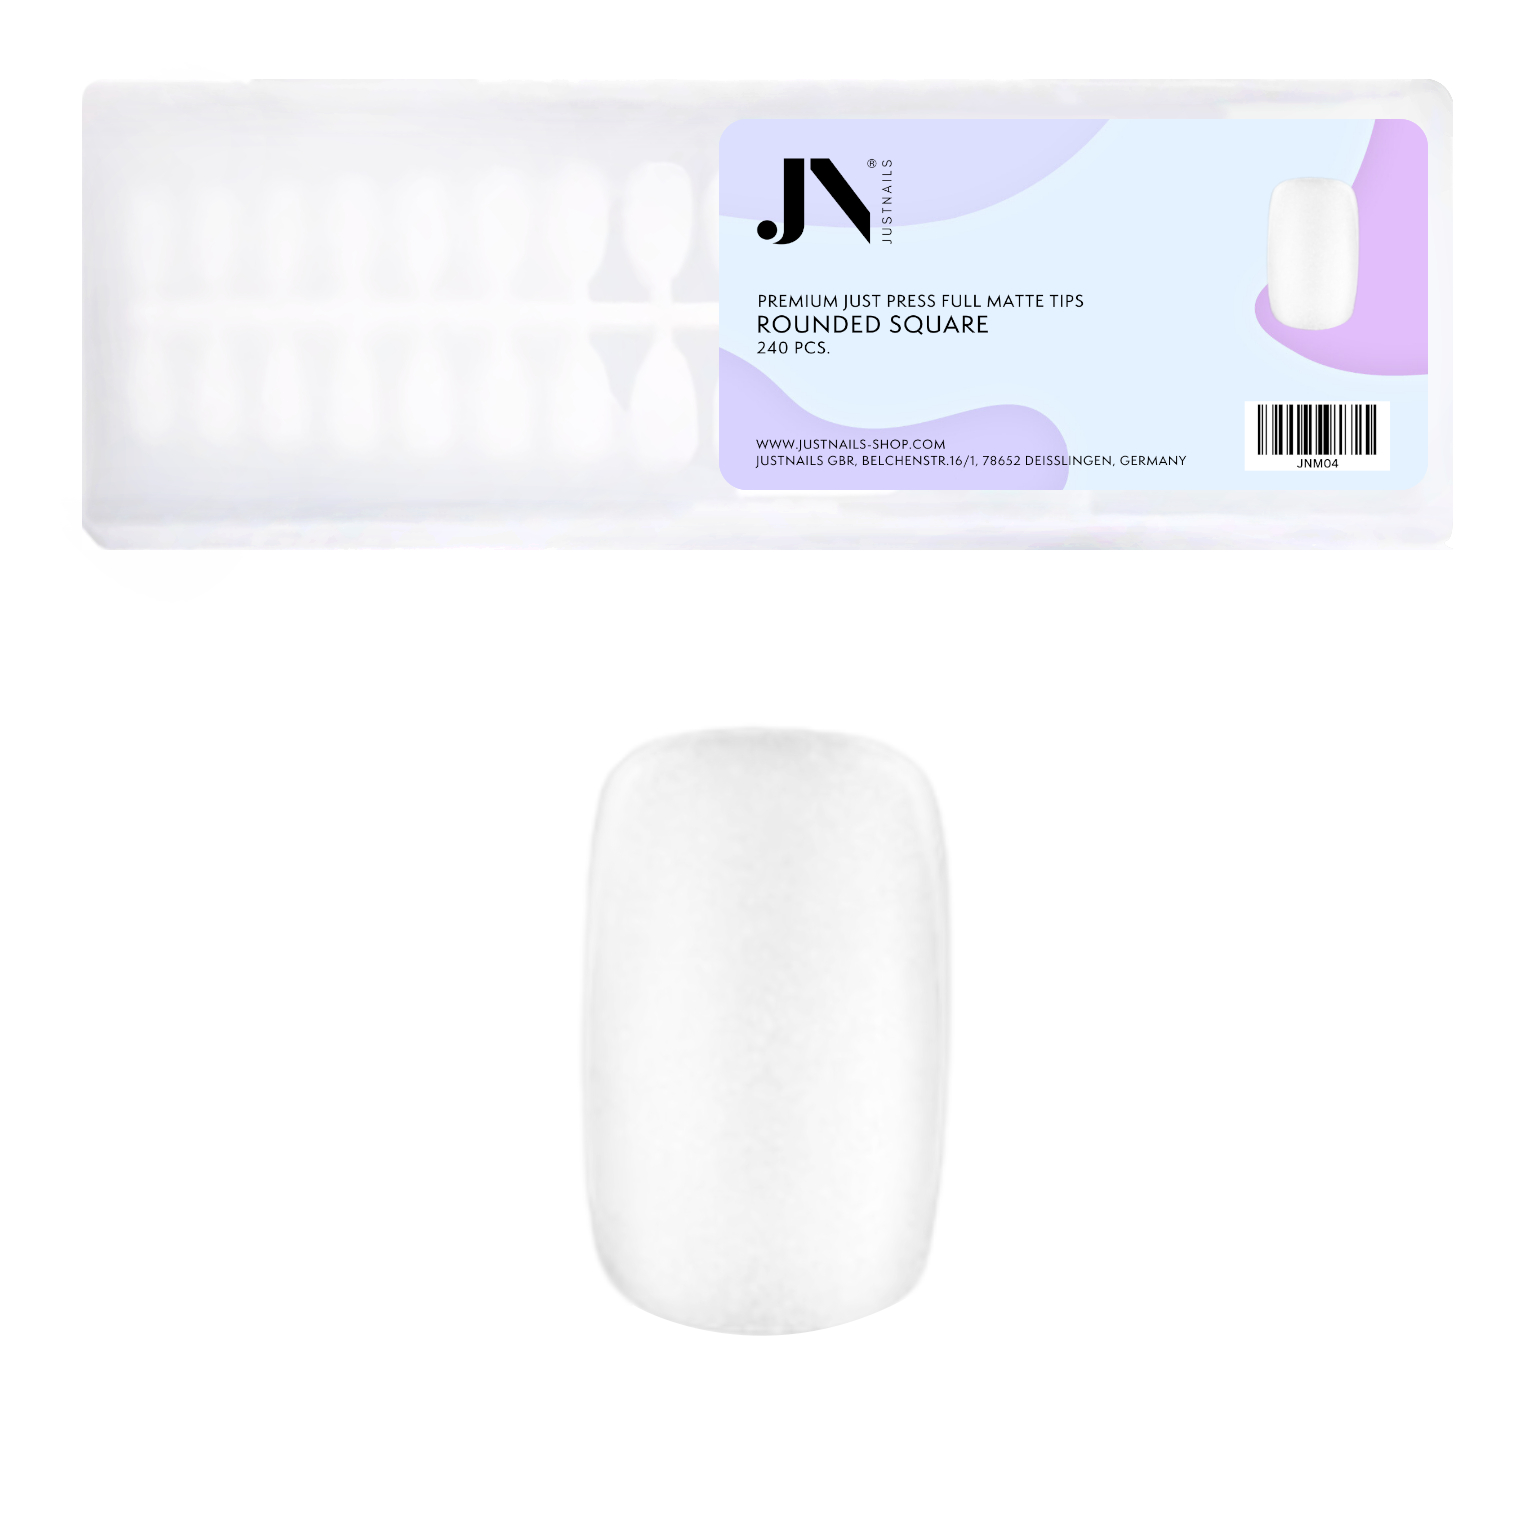 JUST PRESS Full Matte - ROUNDED SQUARE Fullcover Press On Tips Nails in Box 240 Stk.